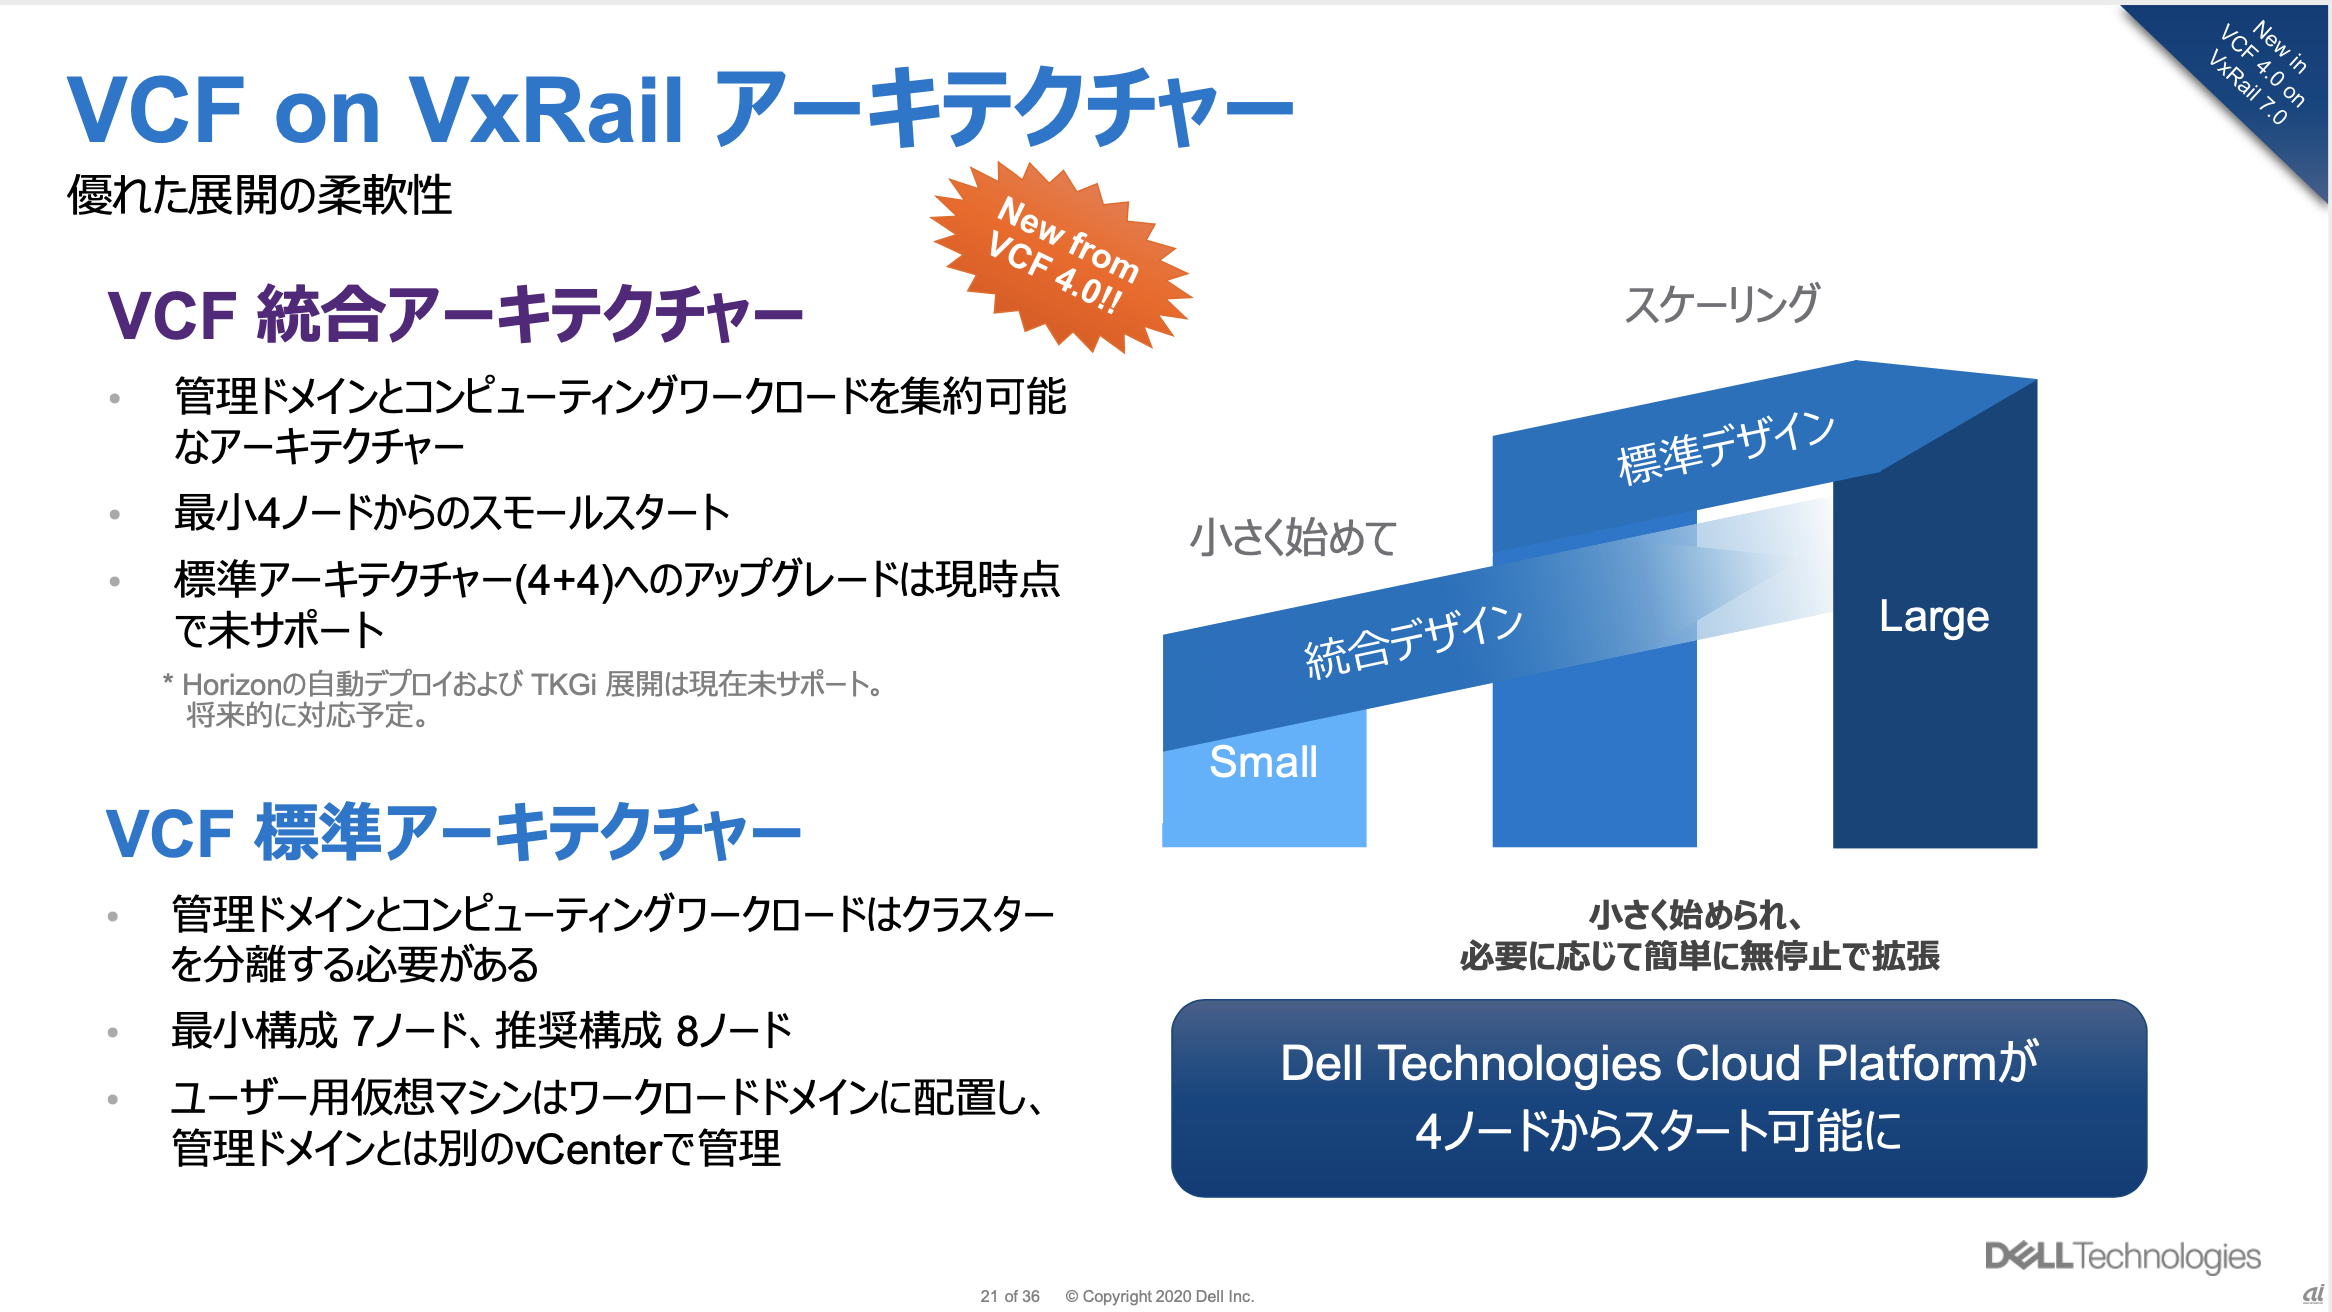 VCF on VxRail アーキテクチャー